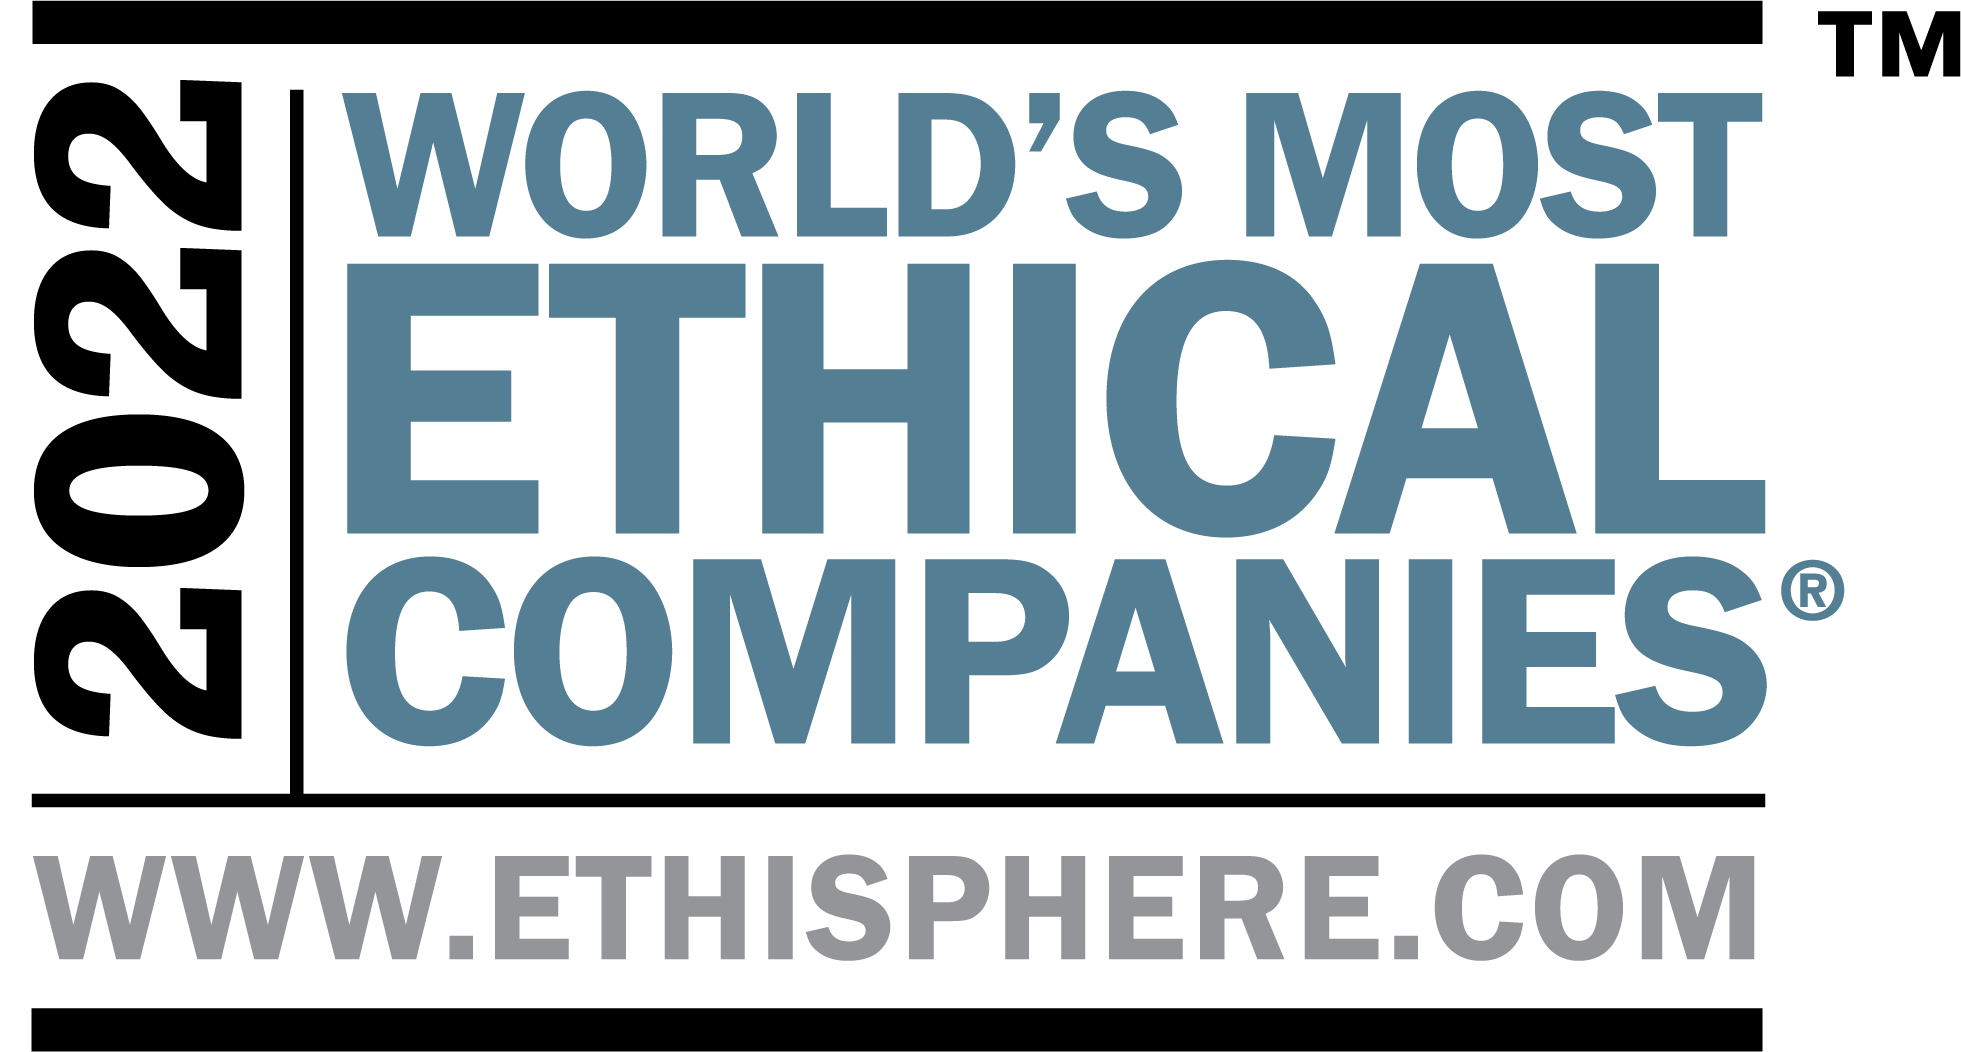 Ethisphere 2022 World's Most Ethical Companies